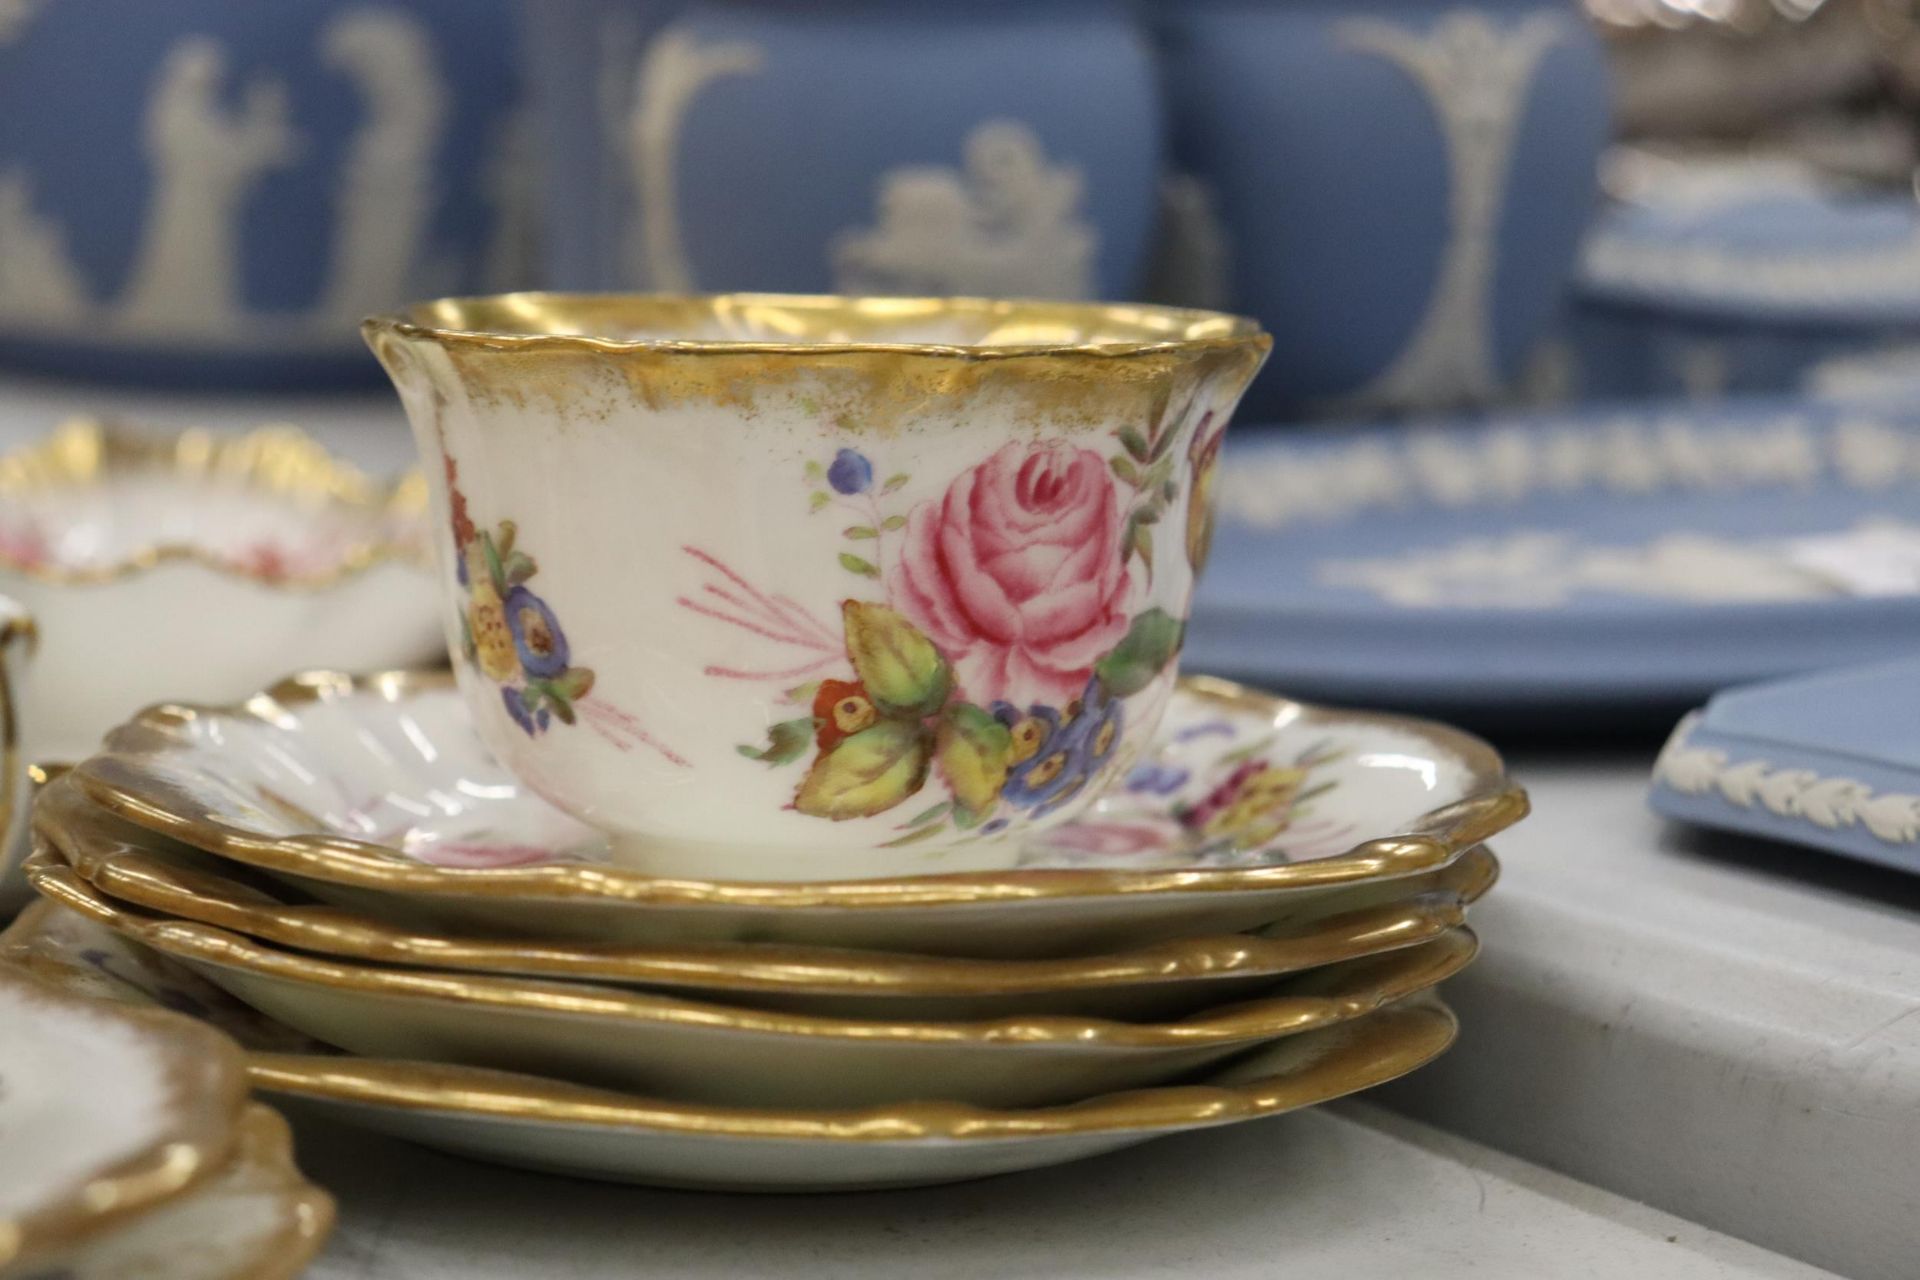 A 15 PIECE PART TEASET HAMMERSLEY AND CO TOGETHER WITH AN OLD ROYAL ALBERT COUNTRY ROSES CAKE PLATES - Image 4 of 10